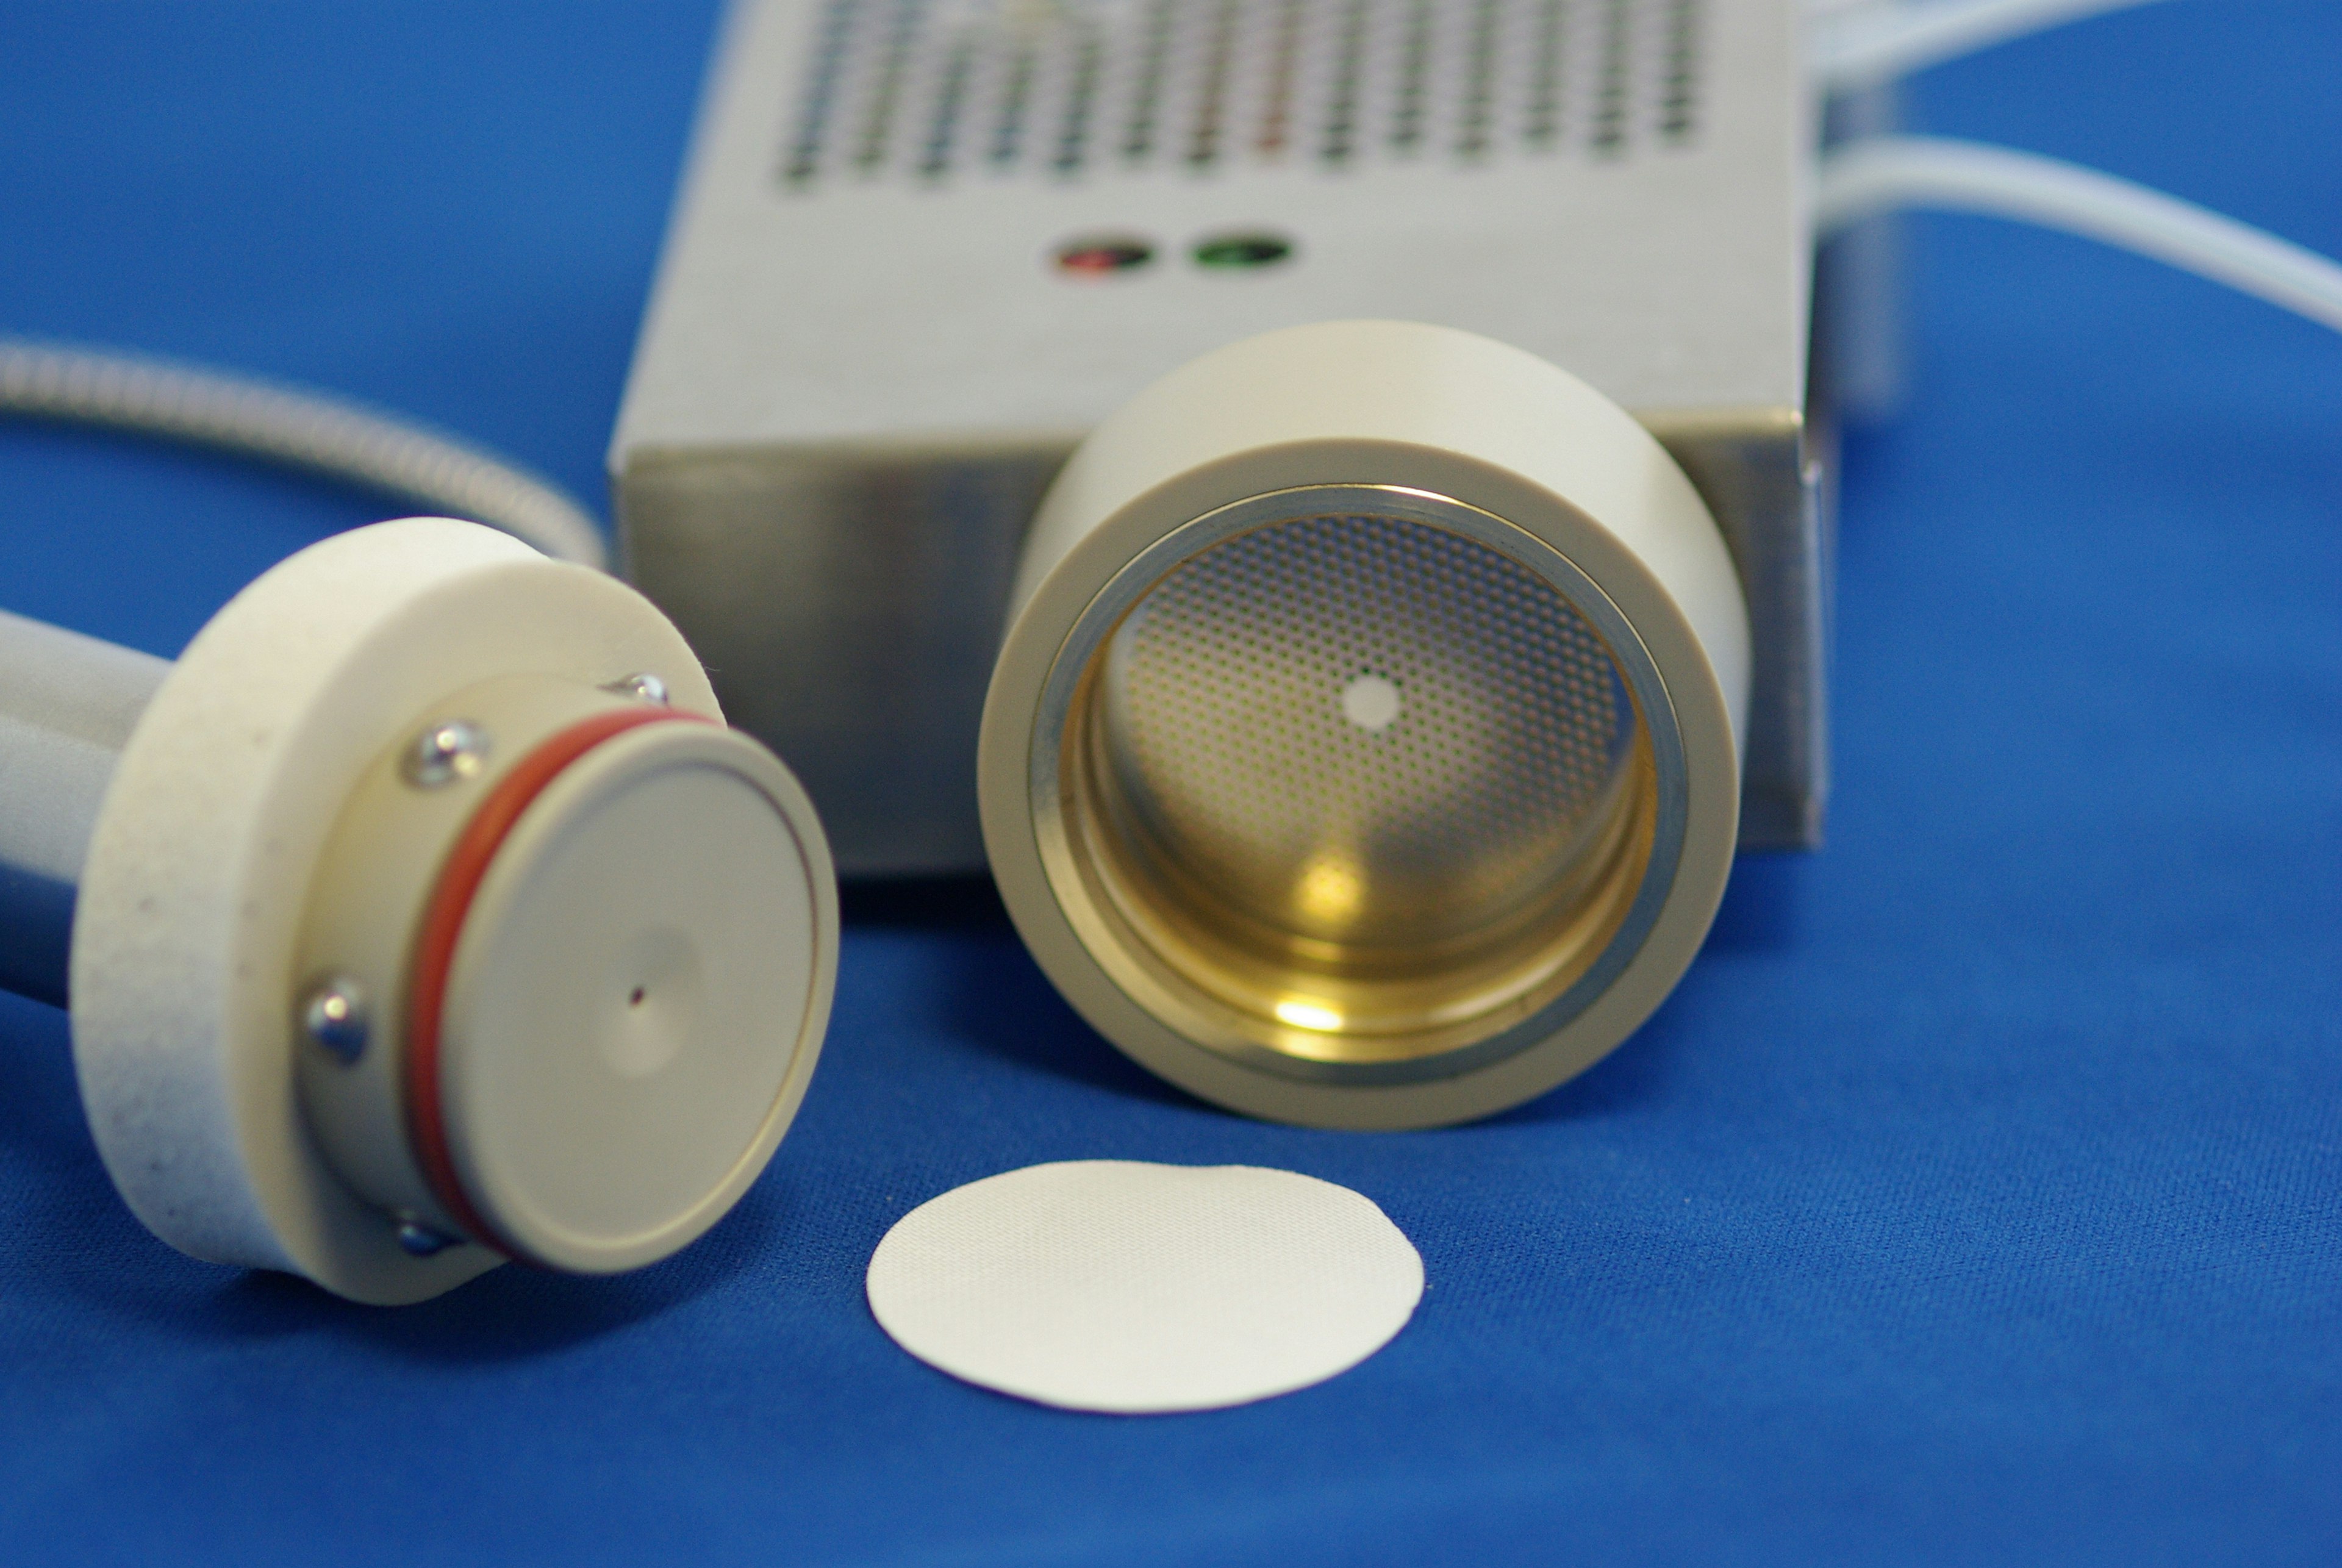 Open in-line filter accessory showing replaceable filter paper